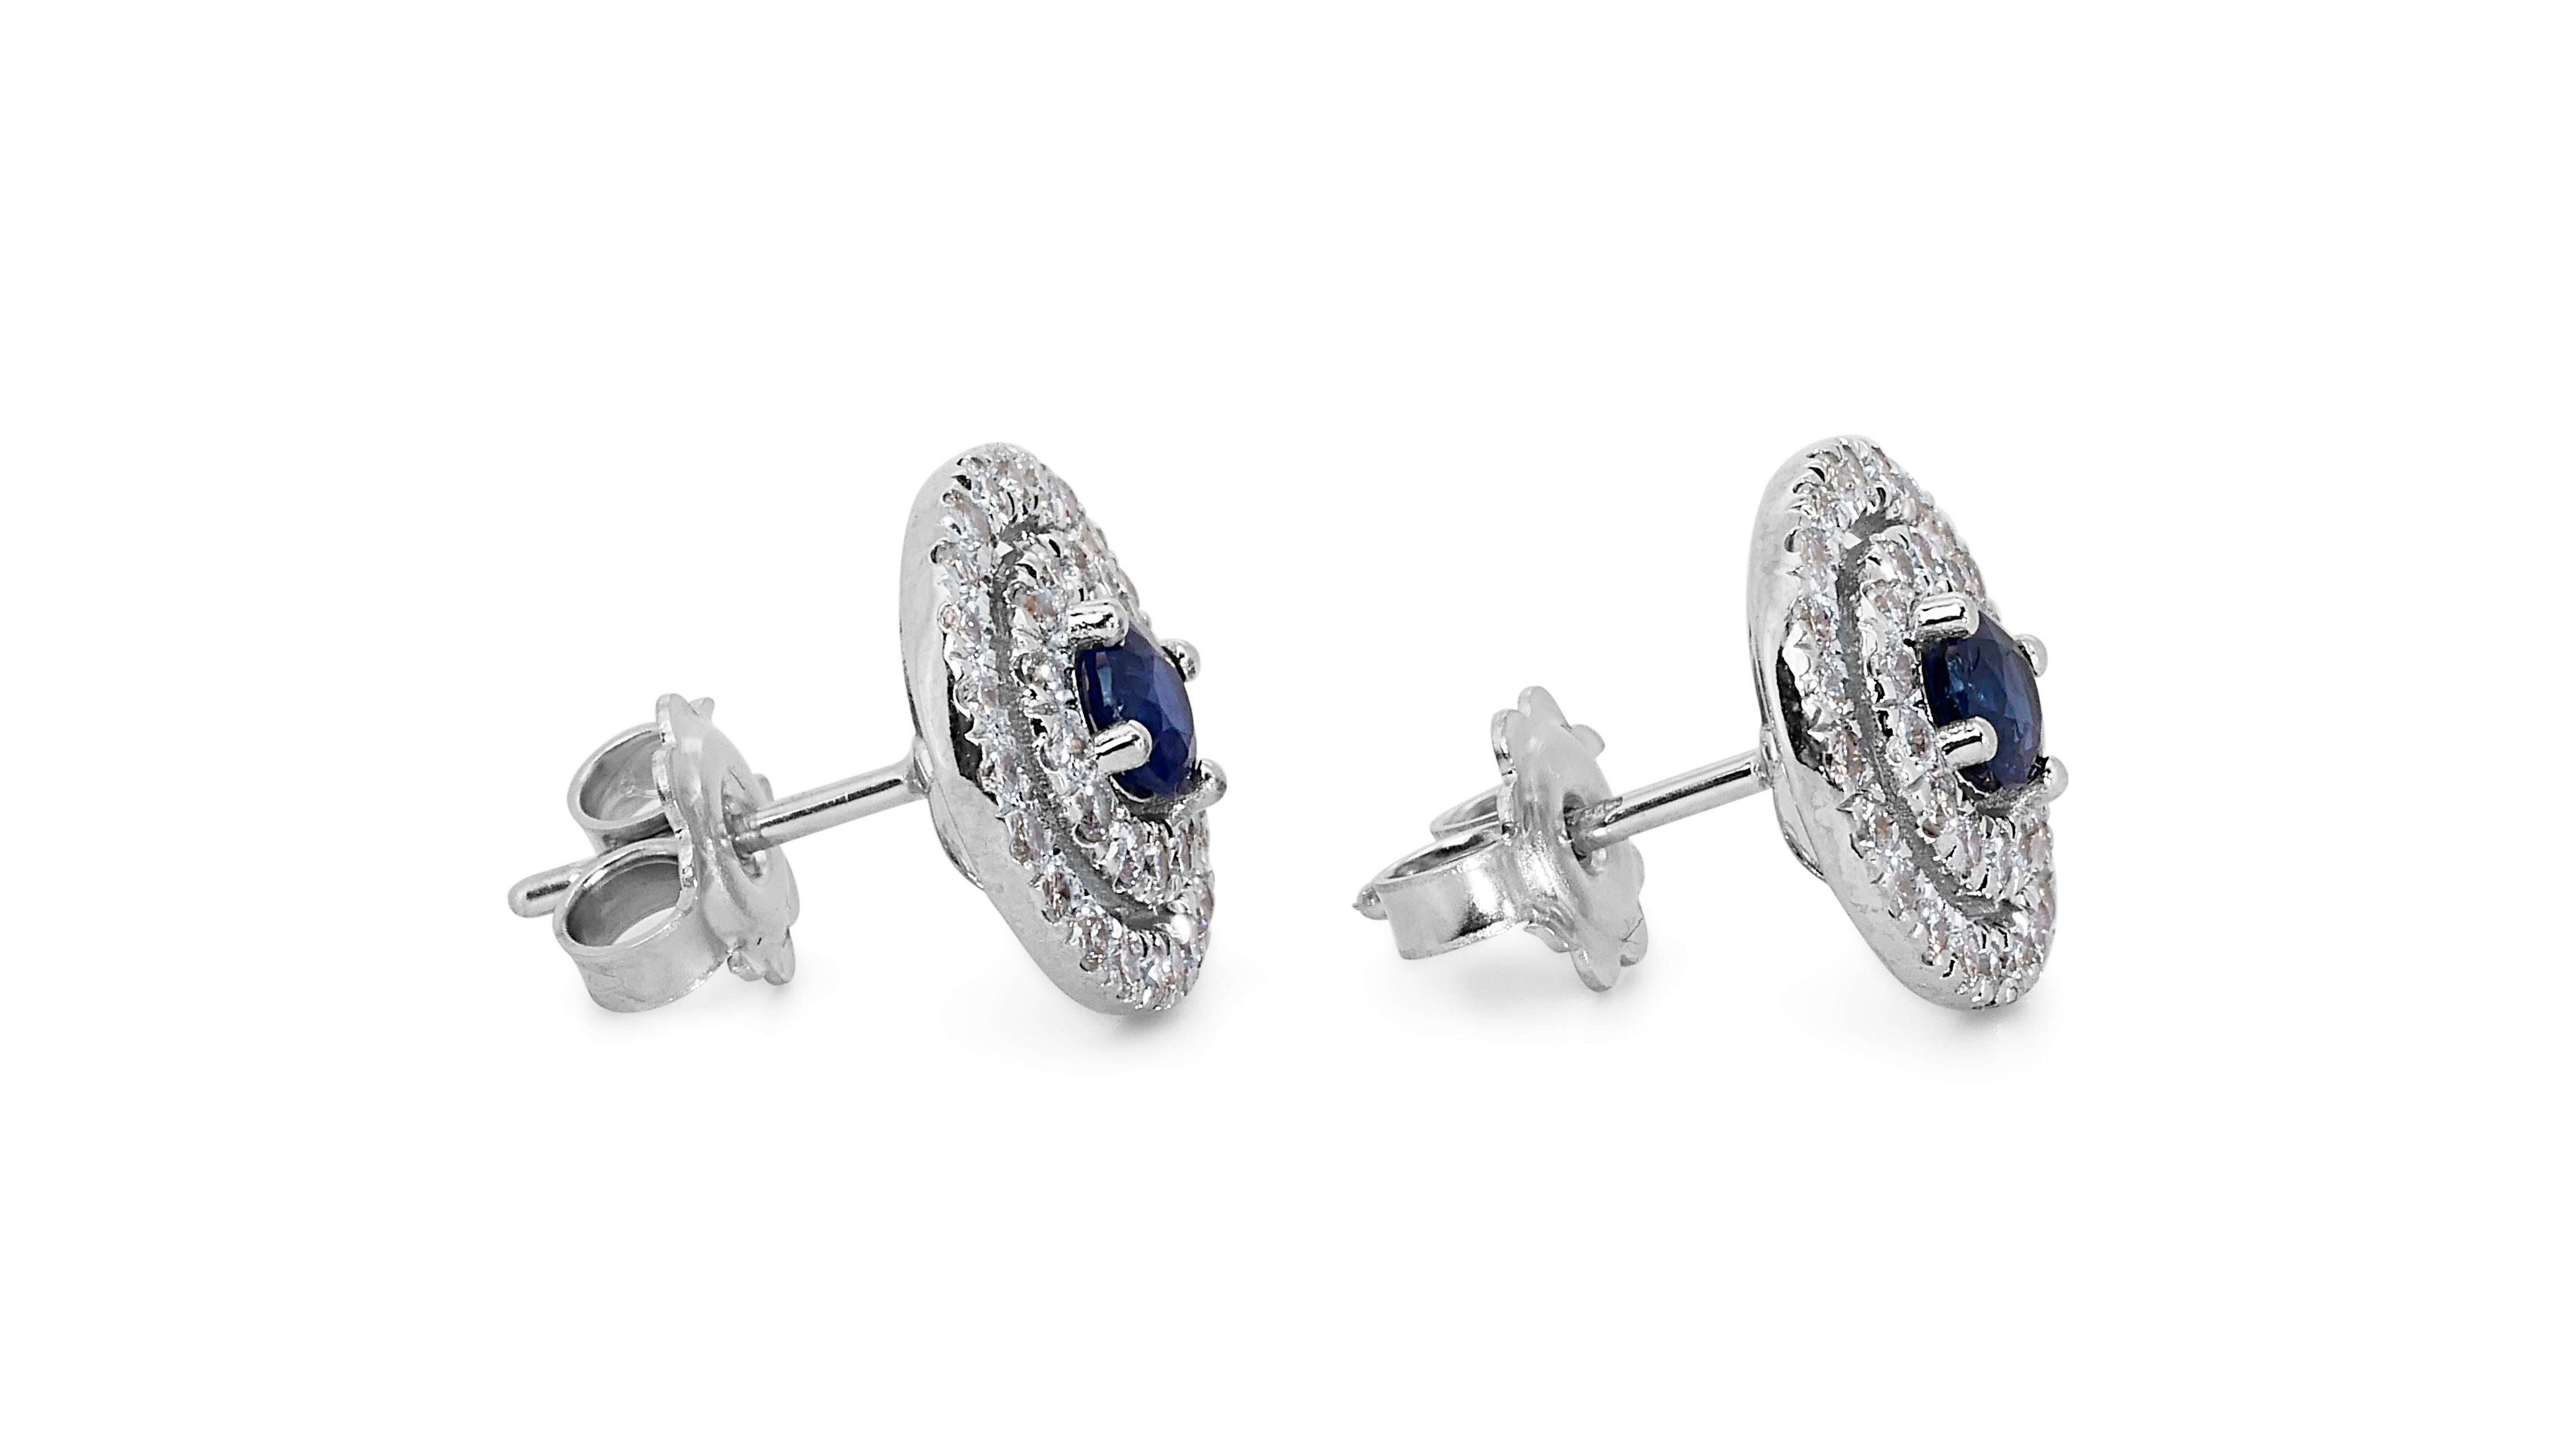 18k White Gold Earrings w/ 1.68ct Sapphire and Natural Diamonds IGI Certificate For Sale 1